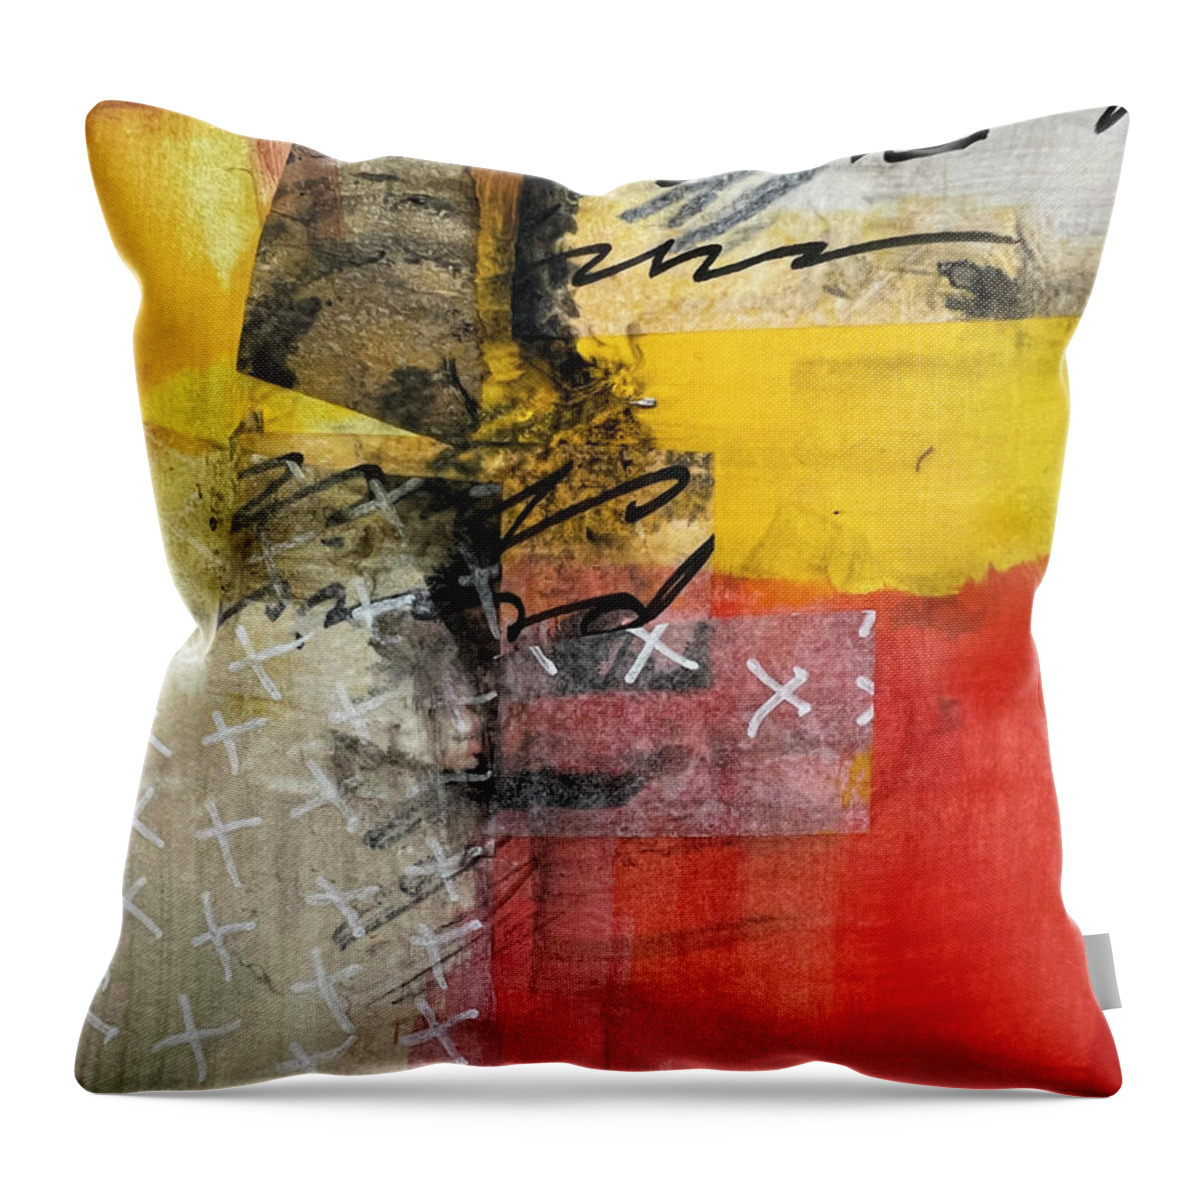 Mixed Media Collage Throw Pillow featuring the painting Encounter by Nancy Merkle